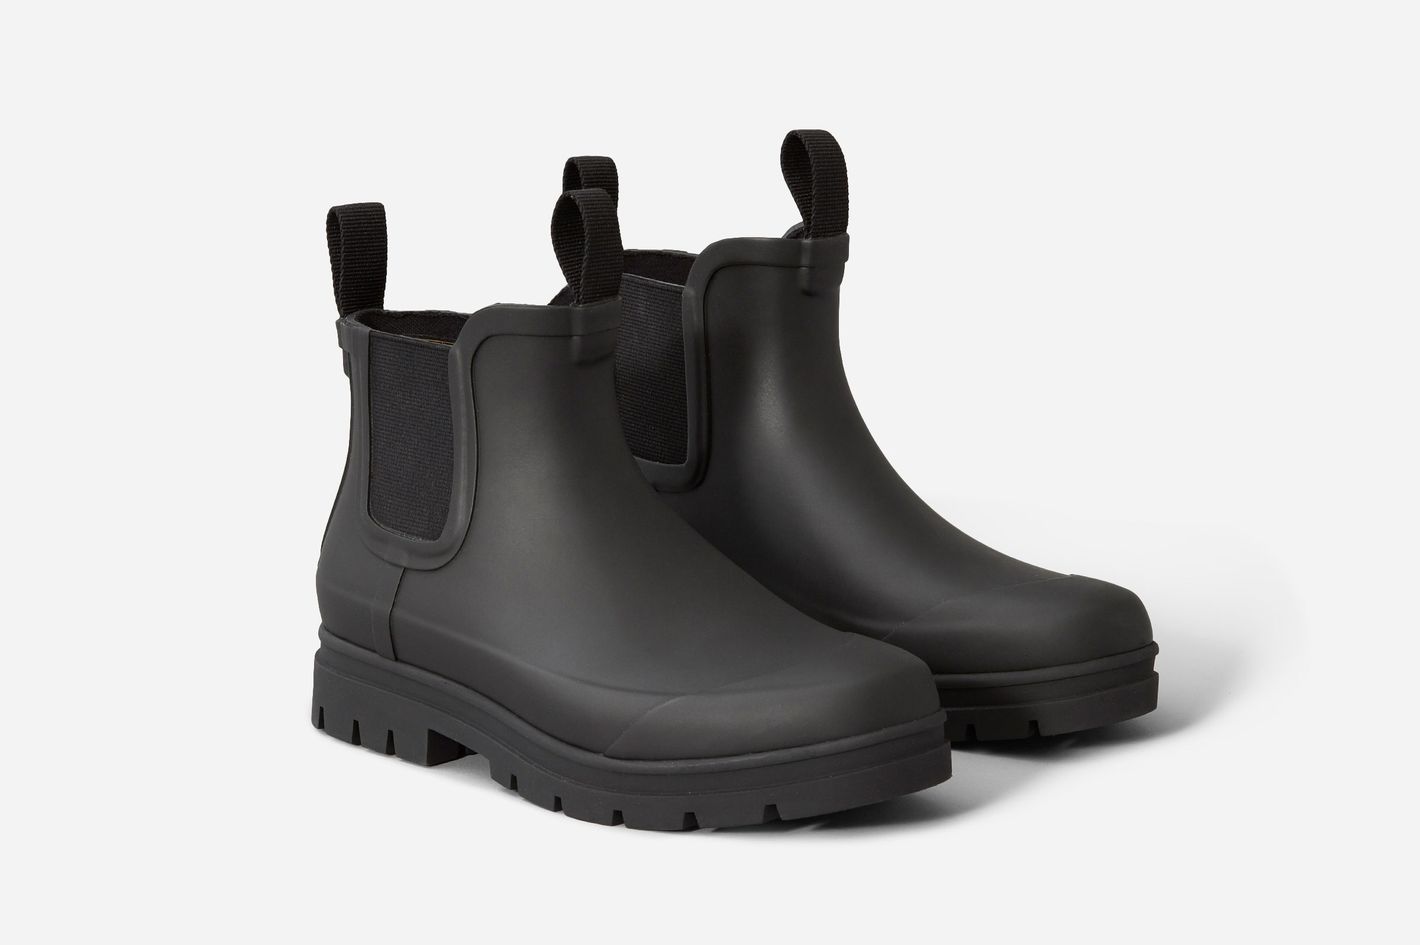 Everlane Has Launched New Rain Boots for $75